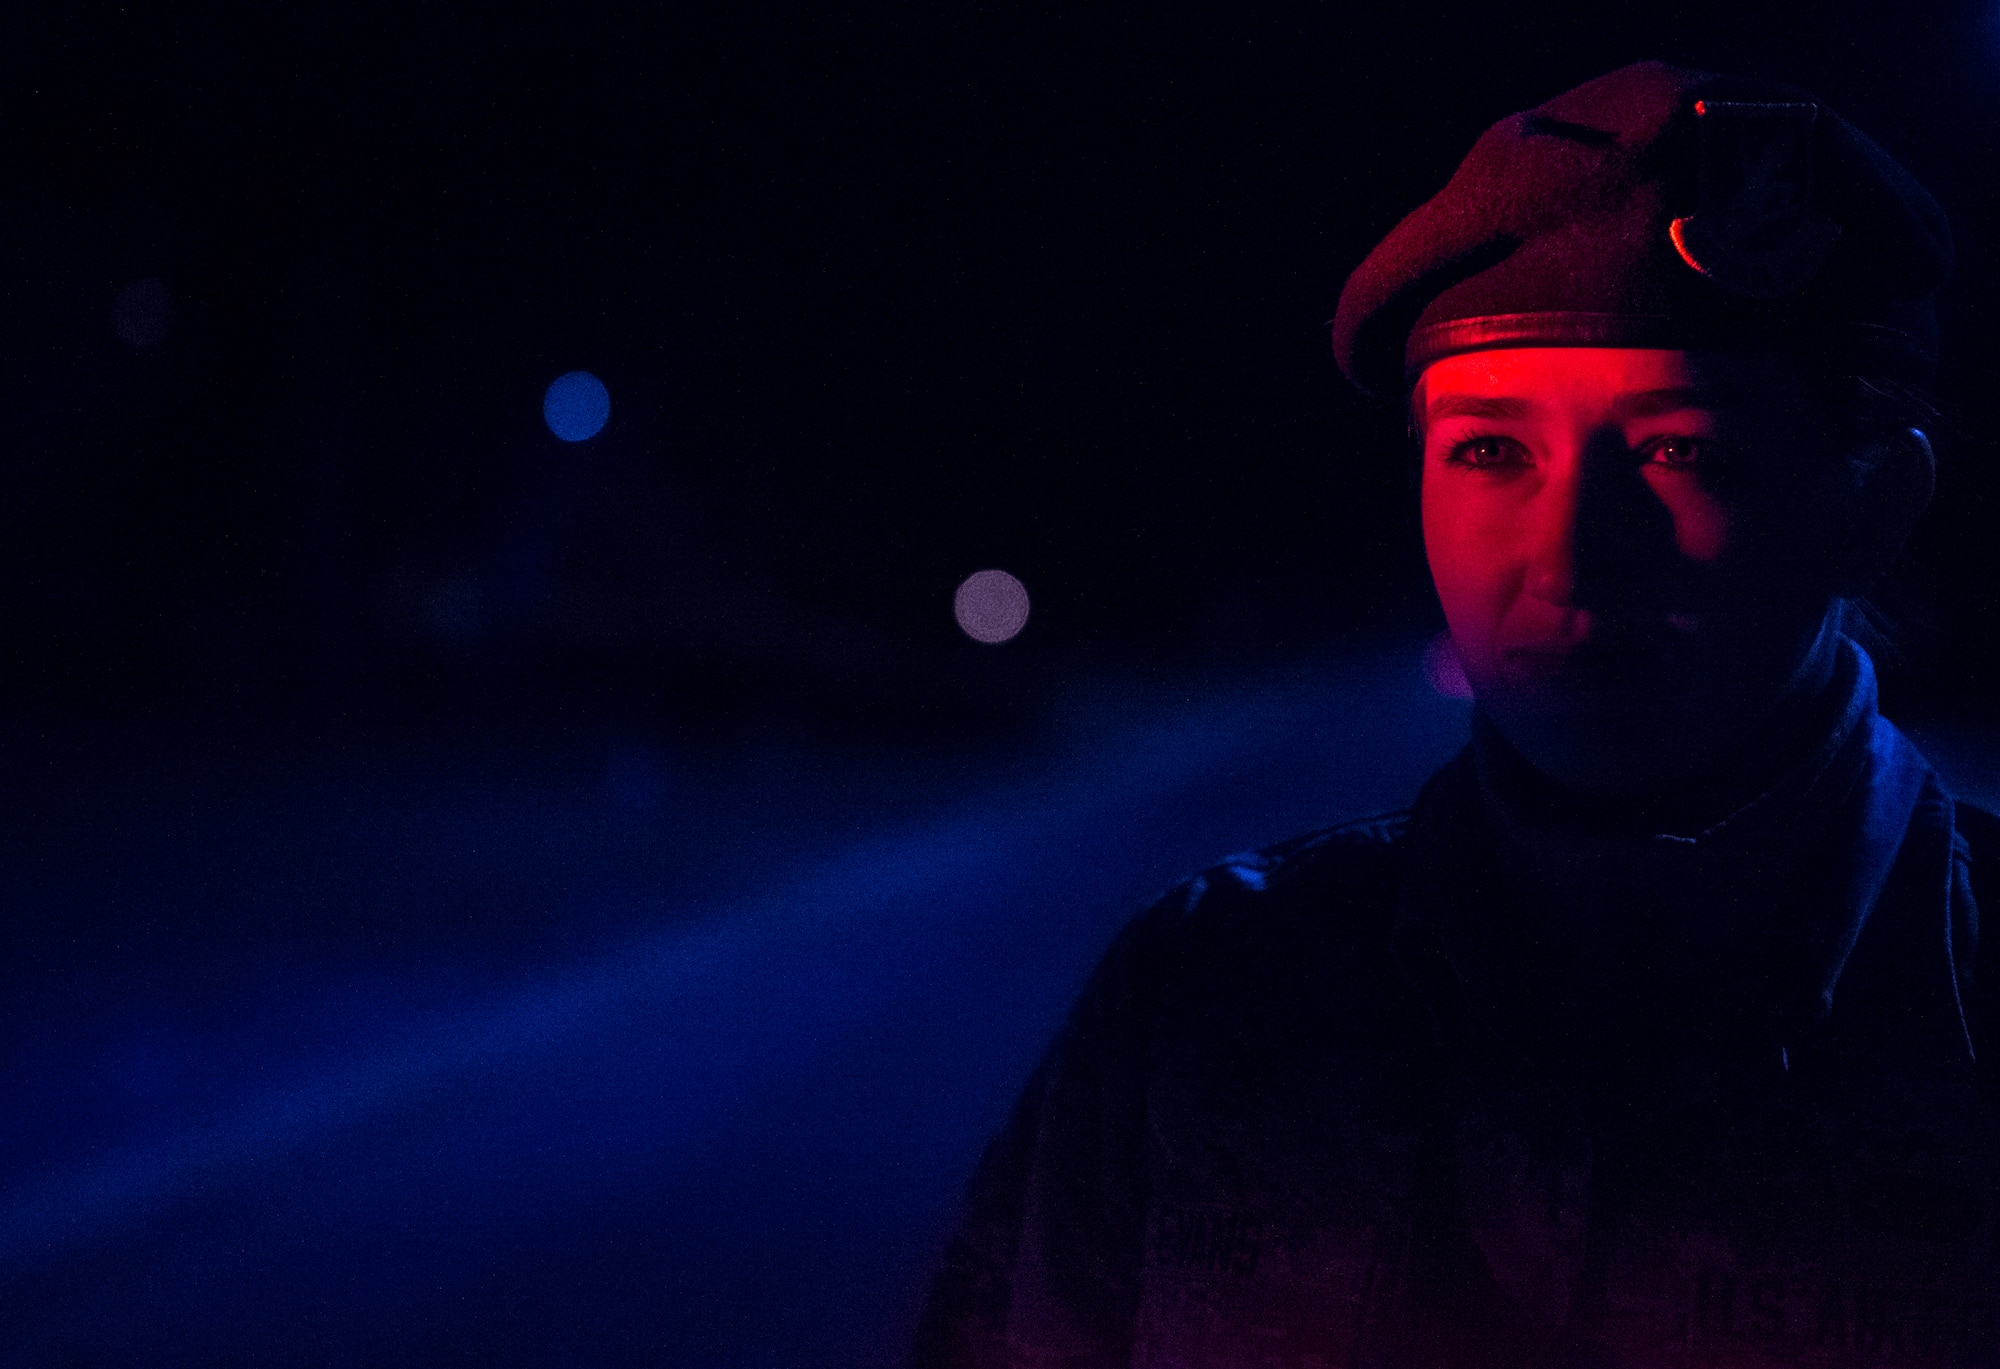 Airman 1st Class Kaitlyn Evans, an 11th Security Forces Squadron patrolman, surveys the road while on night-shift duty at Joint Base Andrews, Maryland. During the evening hours, her role as a patrolman is to secure the base and maintain the safety of personnel. Her attention to detail and military discipline serves as key components to maintaining the demands of owning a horse and performing well at work. (U.S. Air Force photo/Staff Sgt. Vernon Young Jr.)